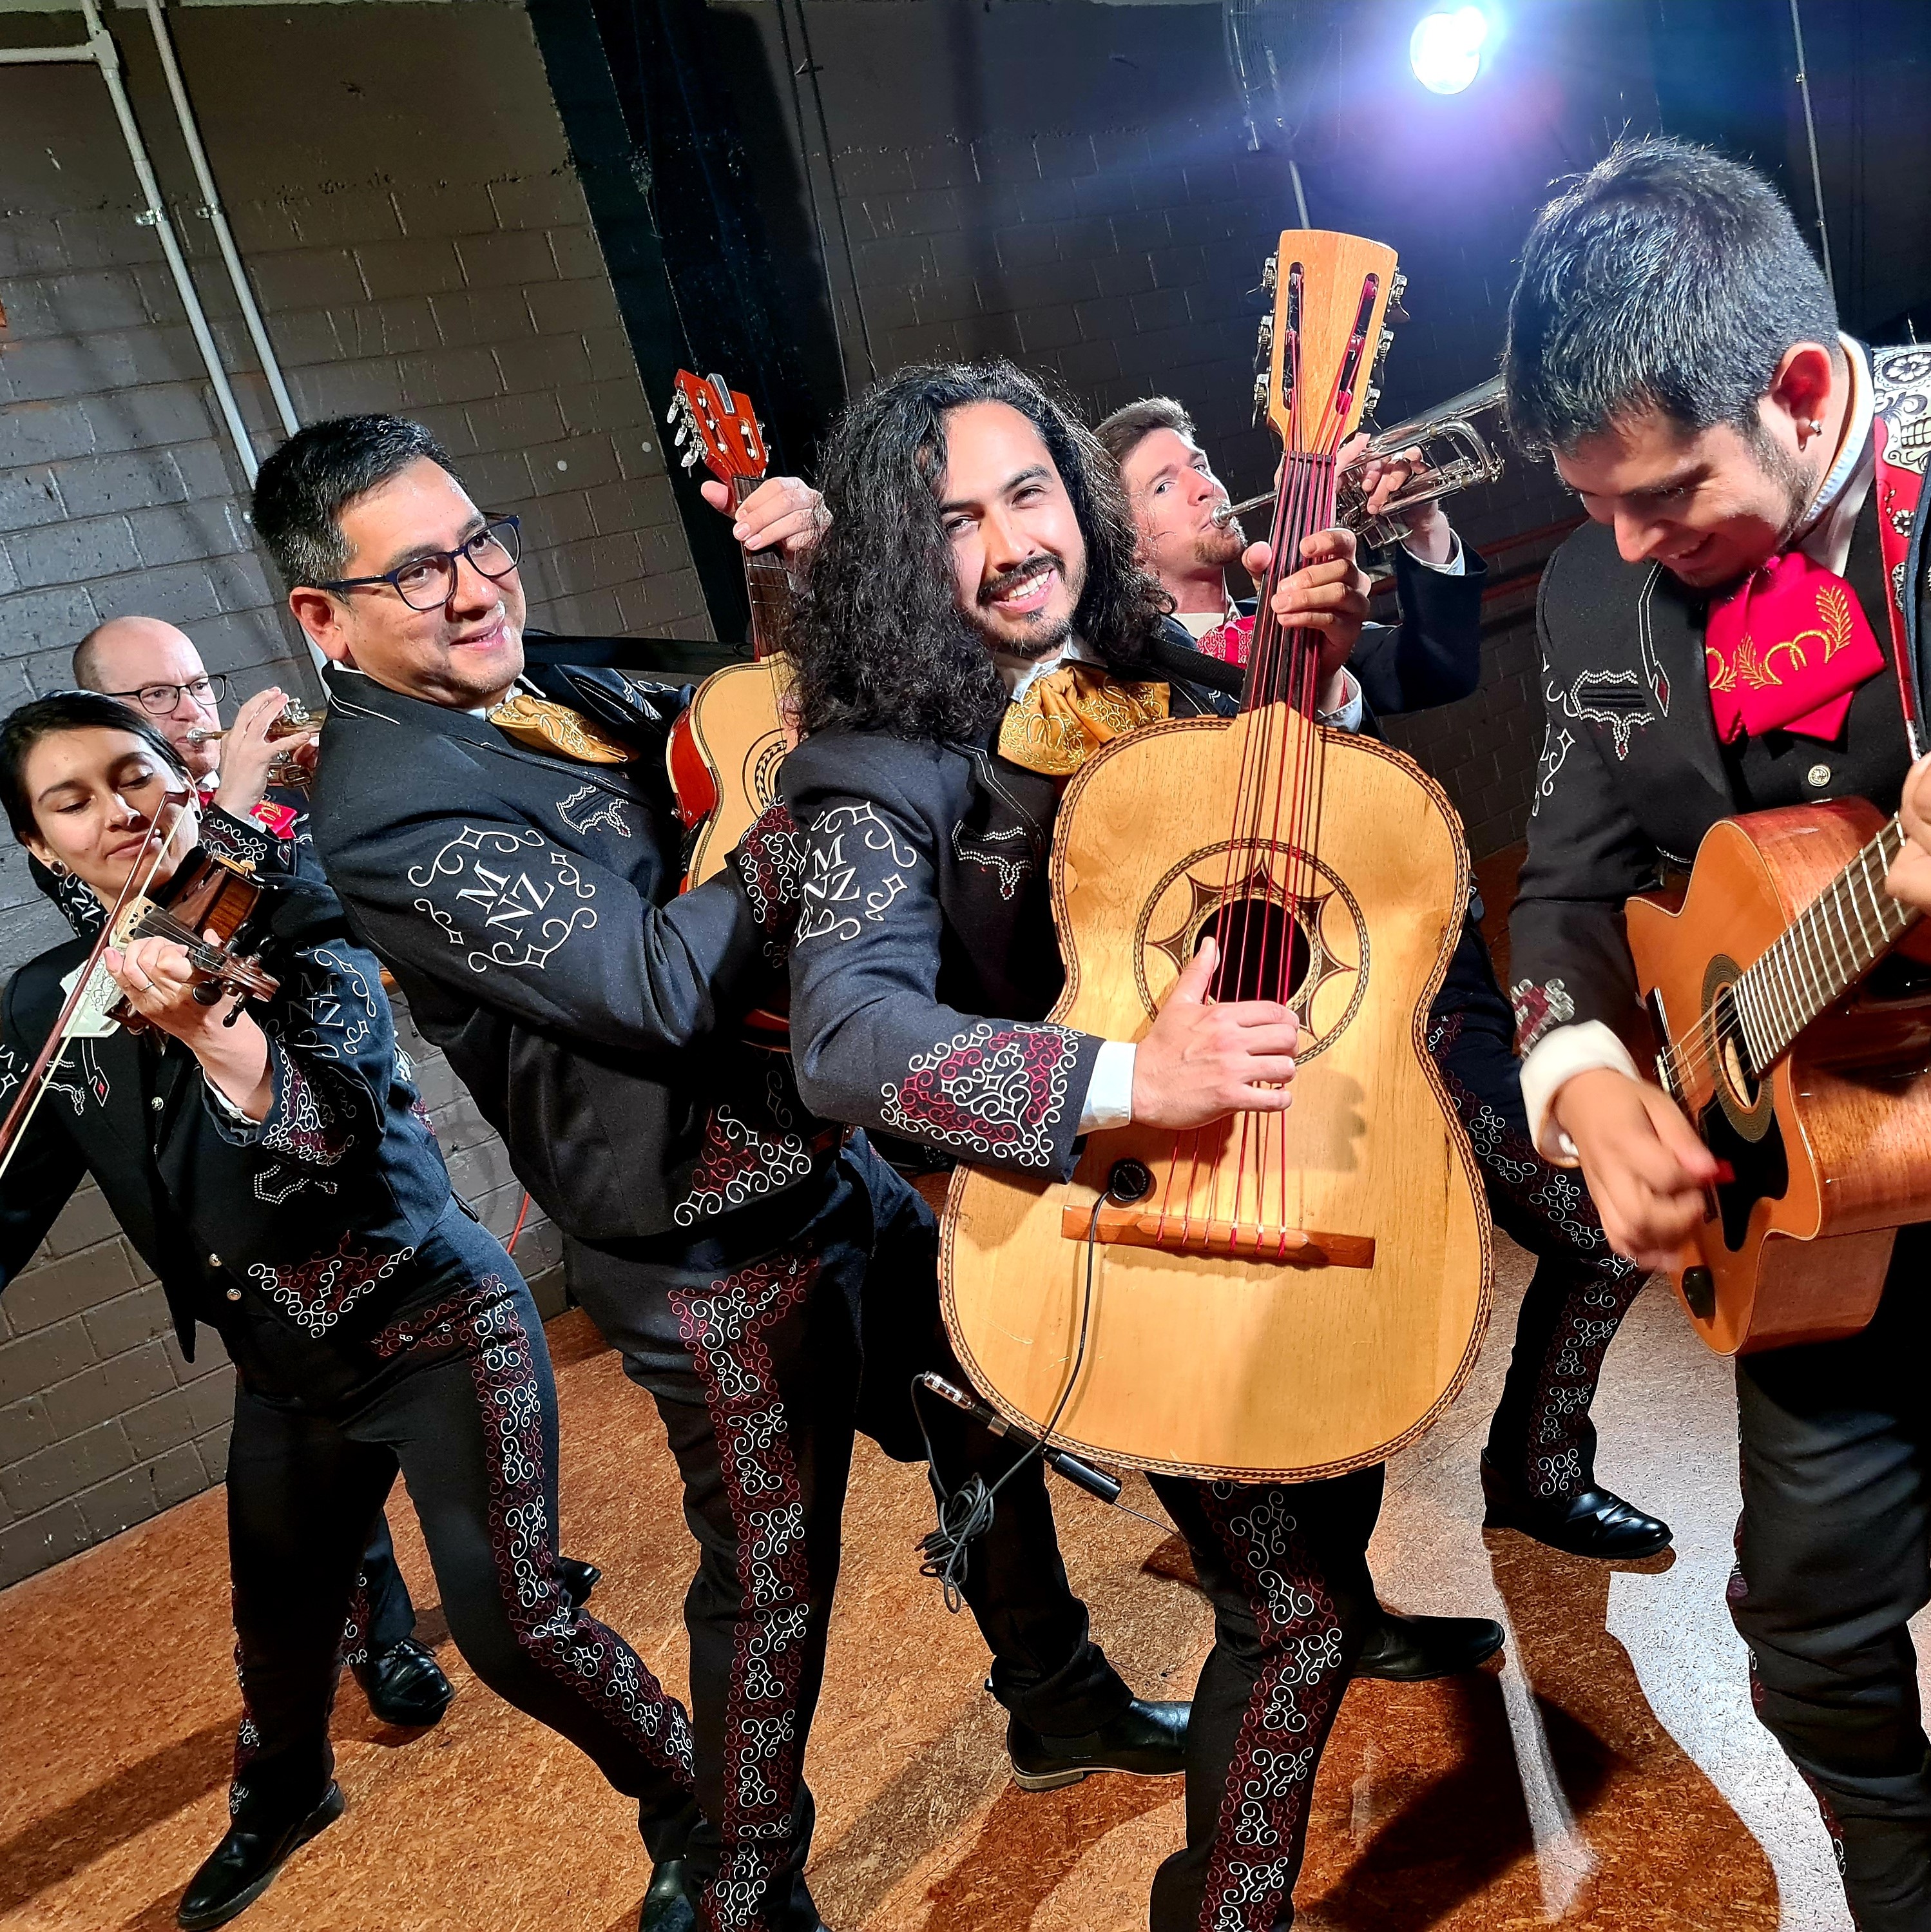 <p><strong>Live music&nbsp;&nbsp;</strong></p>

<p>East Terrace, Level 2&nbsp;</p>

<p><em>6.45&ndash;7.30pm </em>Mariachi band - Feel your heart soar and tap your feet as you listen to the vivacious music of a live mariachi band.&nbsp;&nbsp;</p>

<p><em>6&ndash;9pm</em> relax to the soothing beats spun by our resident DJ, Bobby Brazuka, for the night&nbsp;</p>